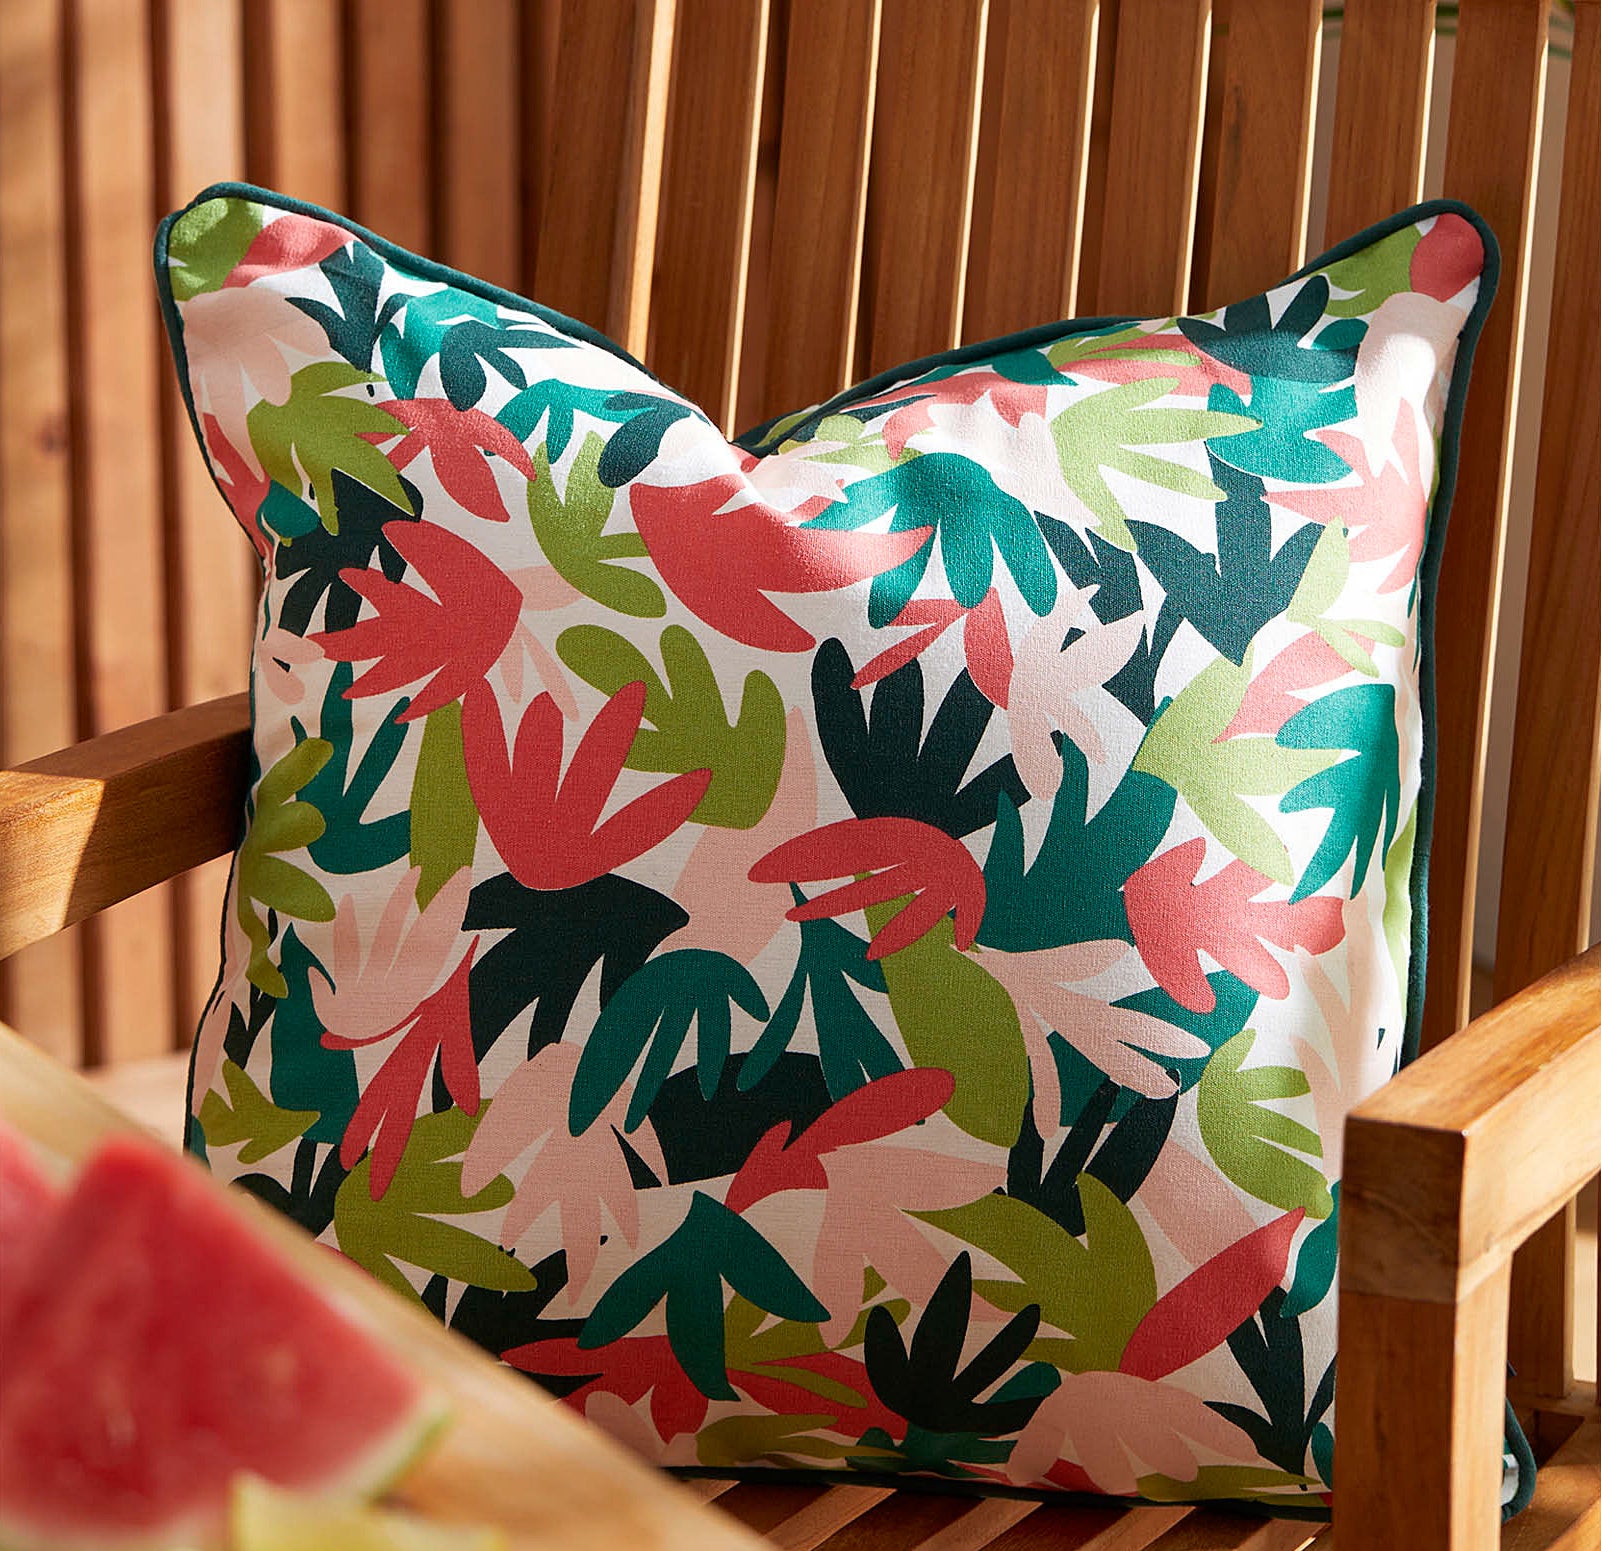 a vibrant patterned pillow on a chair